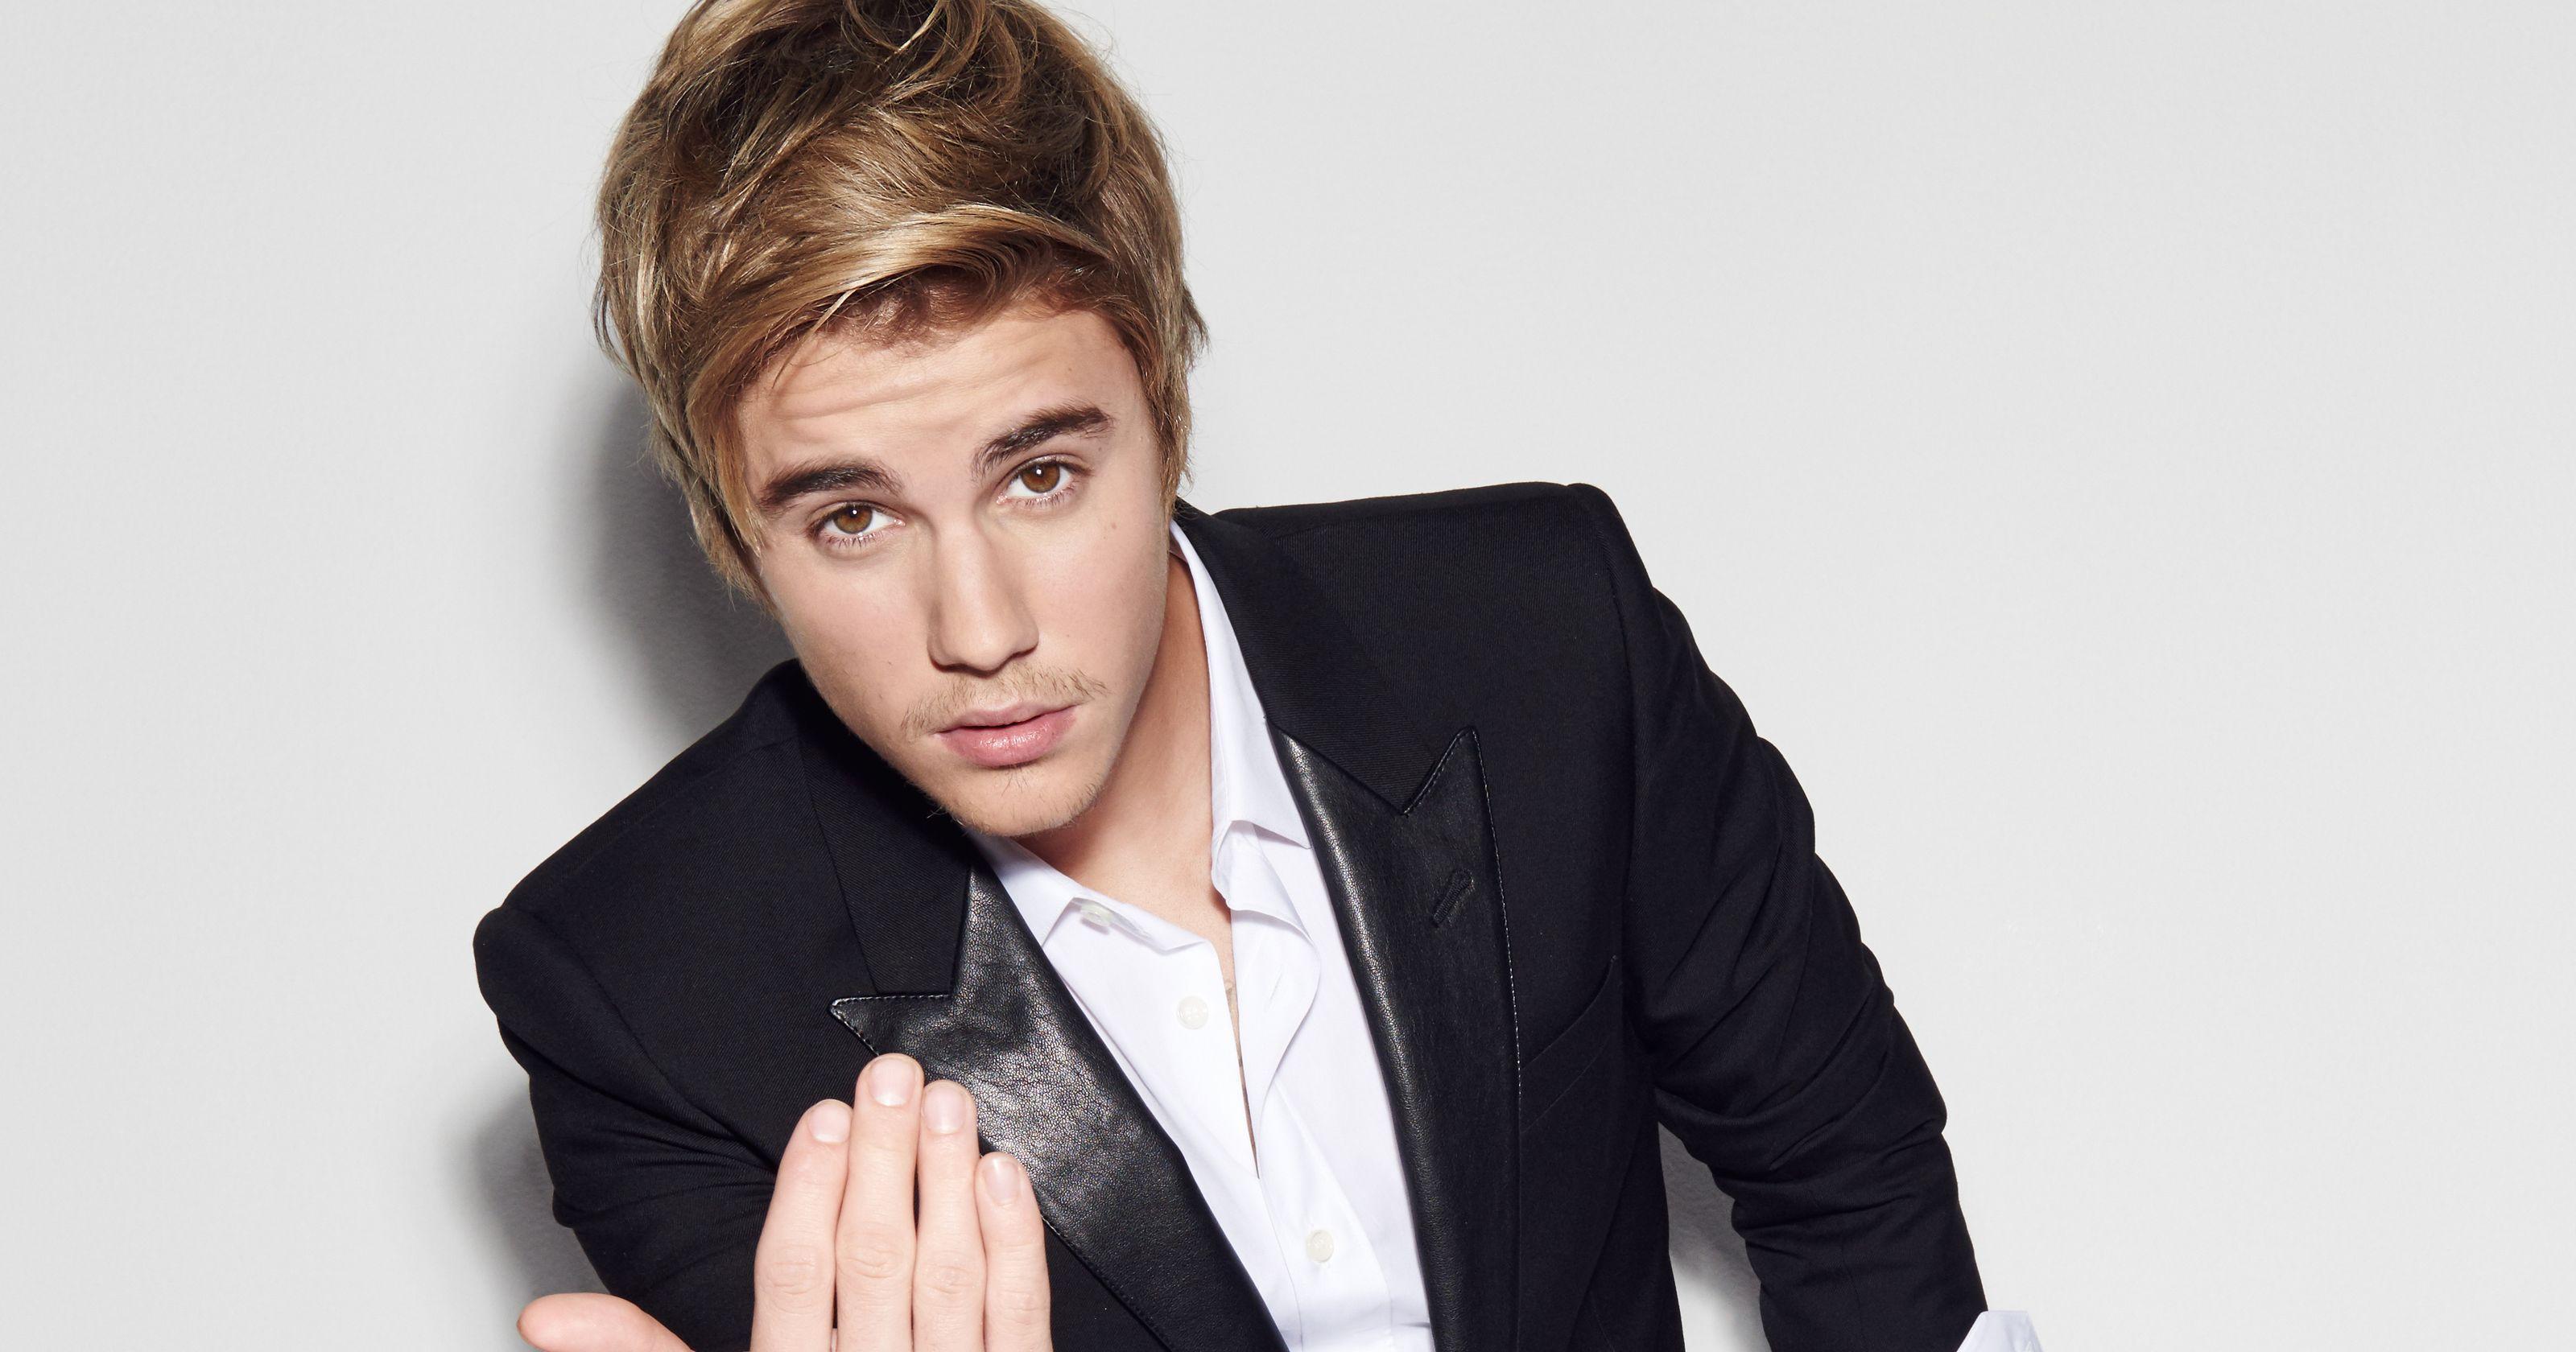 Justin Bieber Wallpaper High Resolution and Quality Download